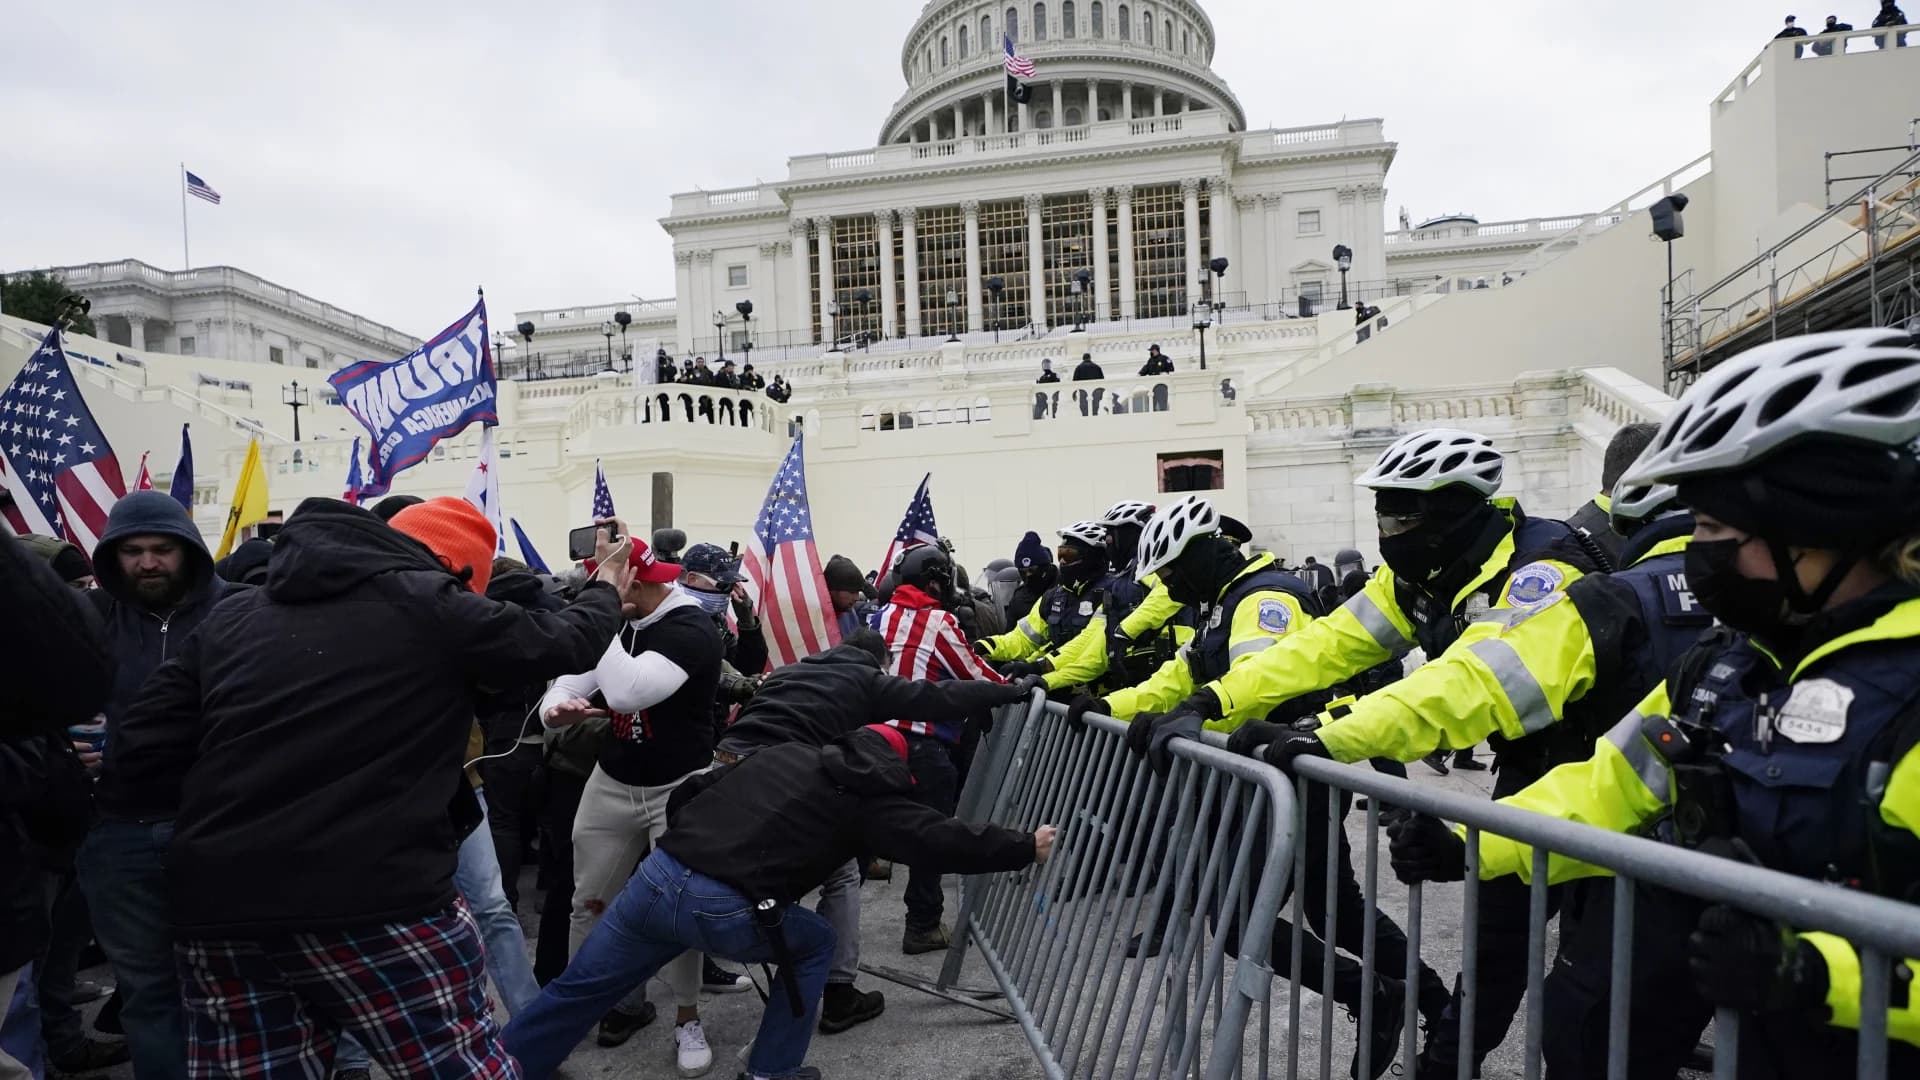 EXPLAINER: Capitol riot investigation growing 2 years later